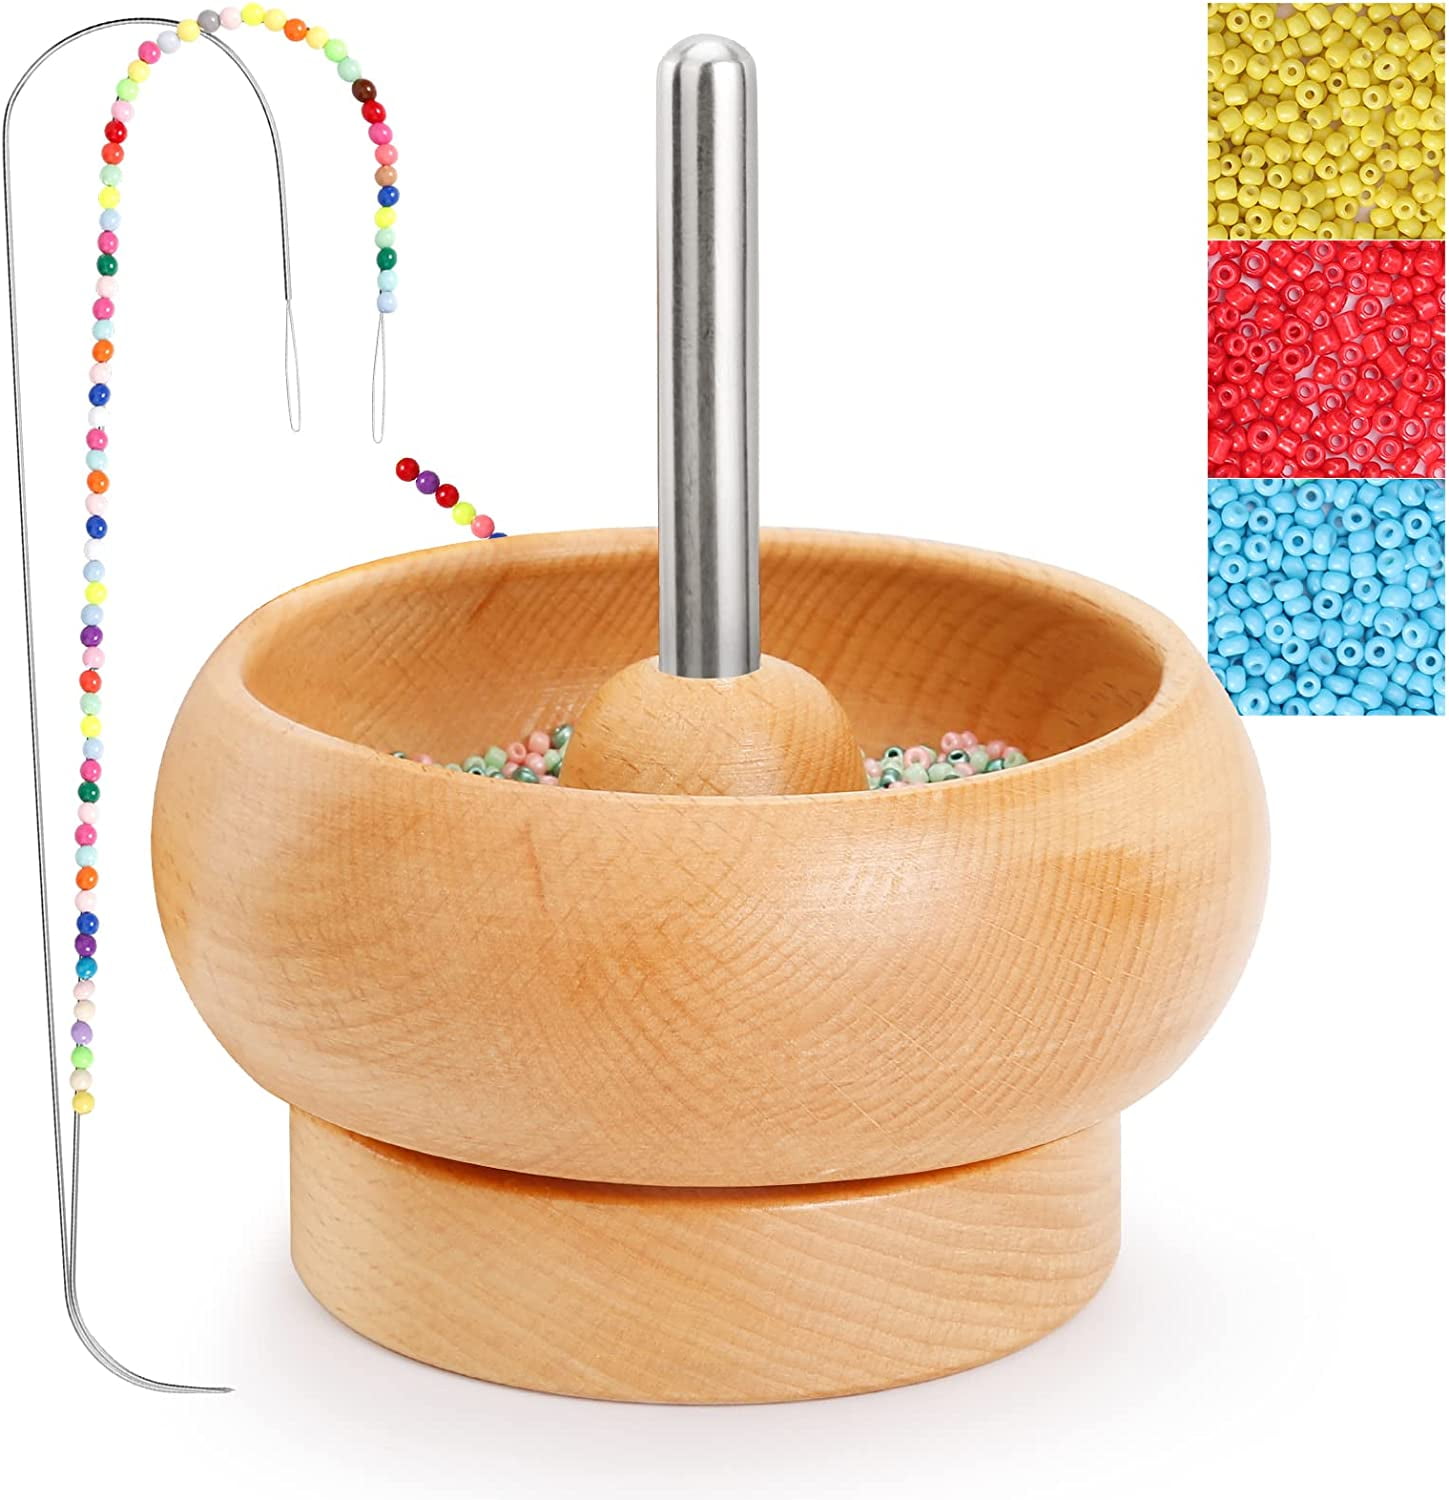 Bead Spinner Bowl Bead Holder for Jewelry Making Crafting Project